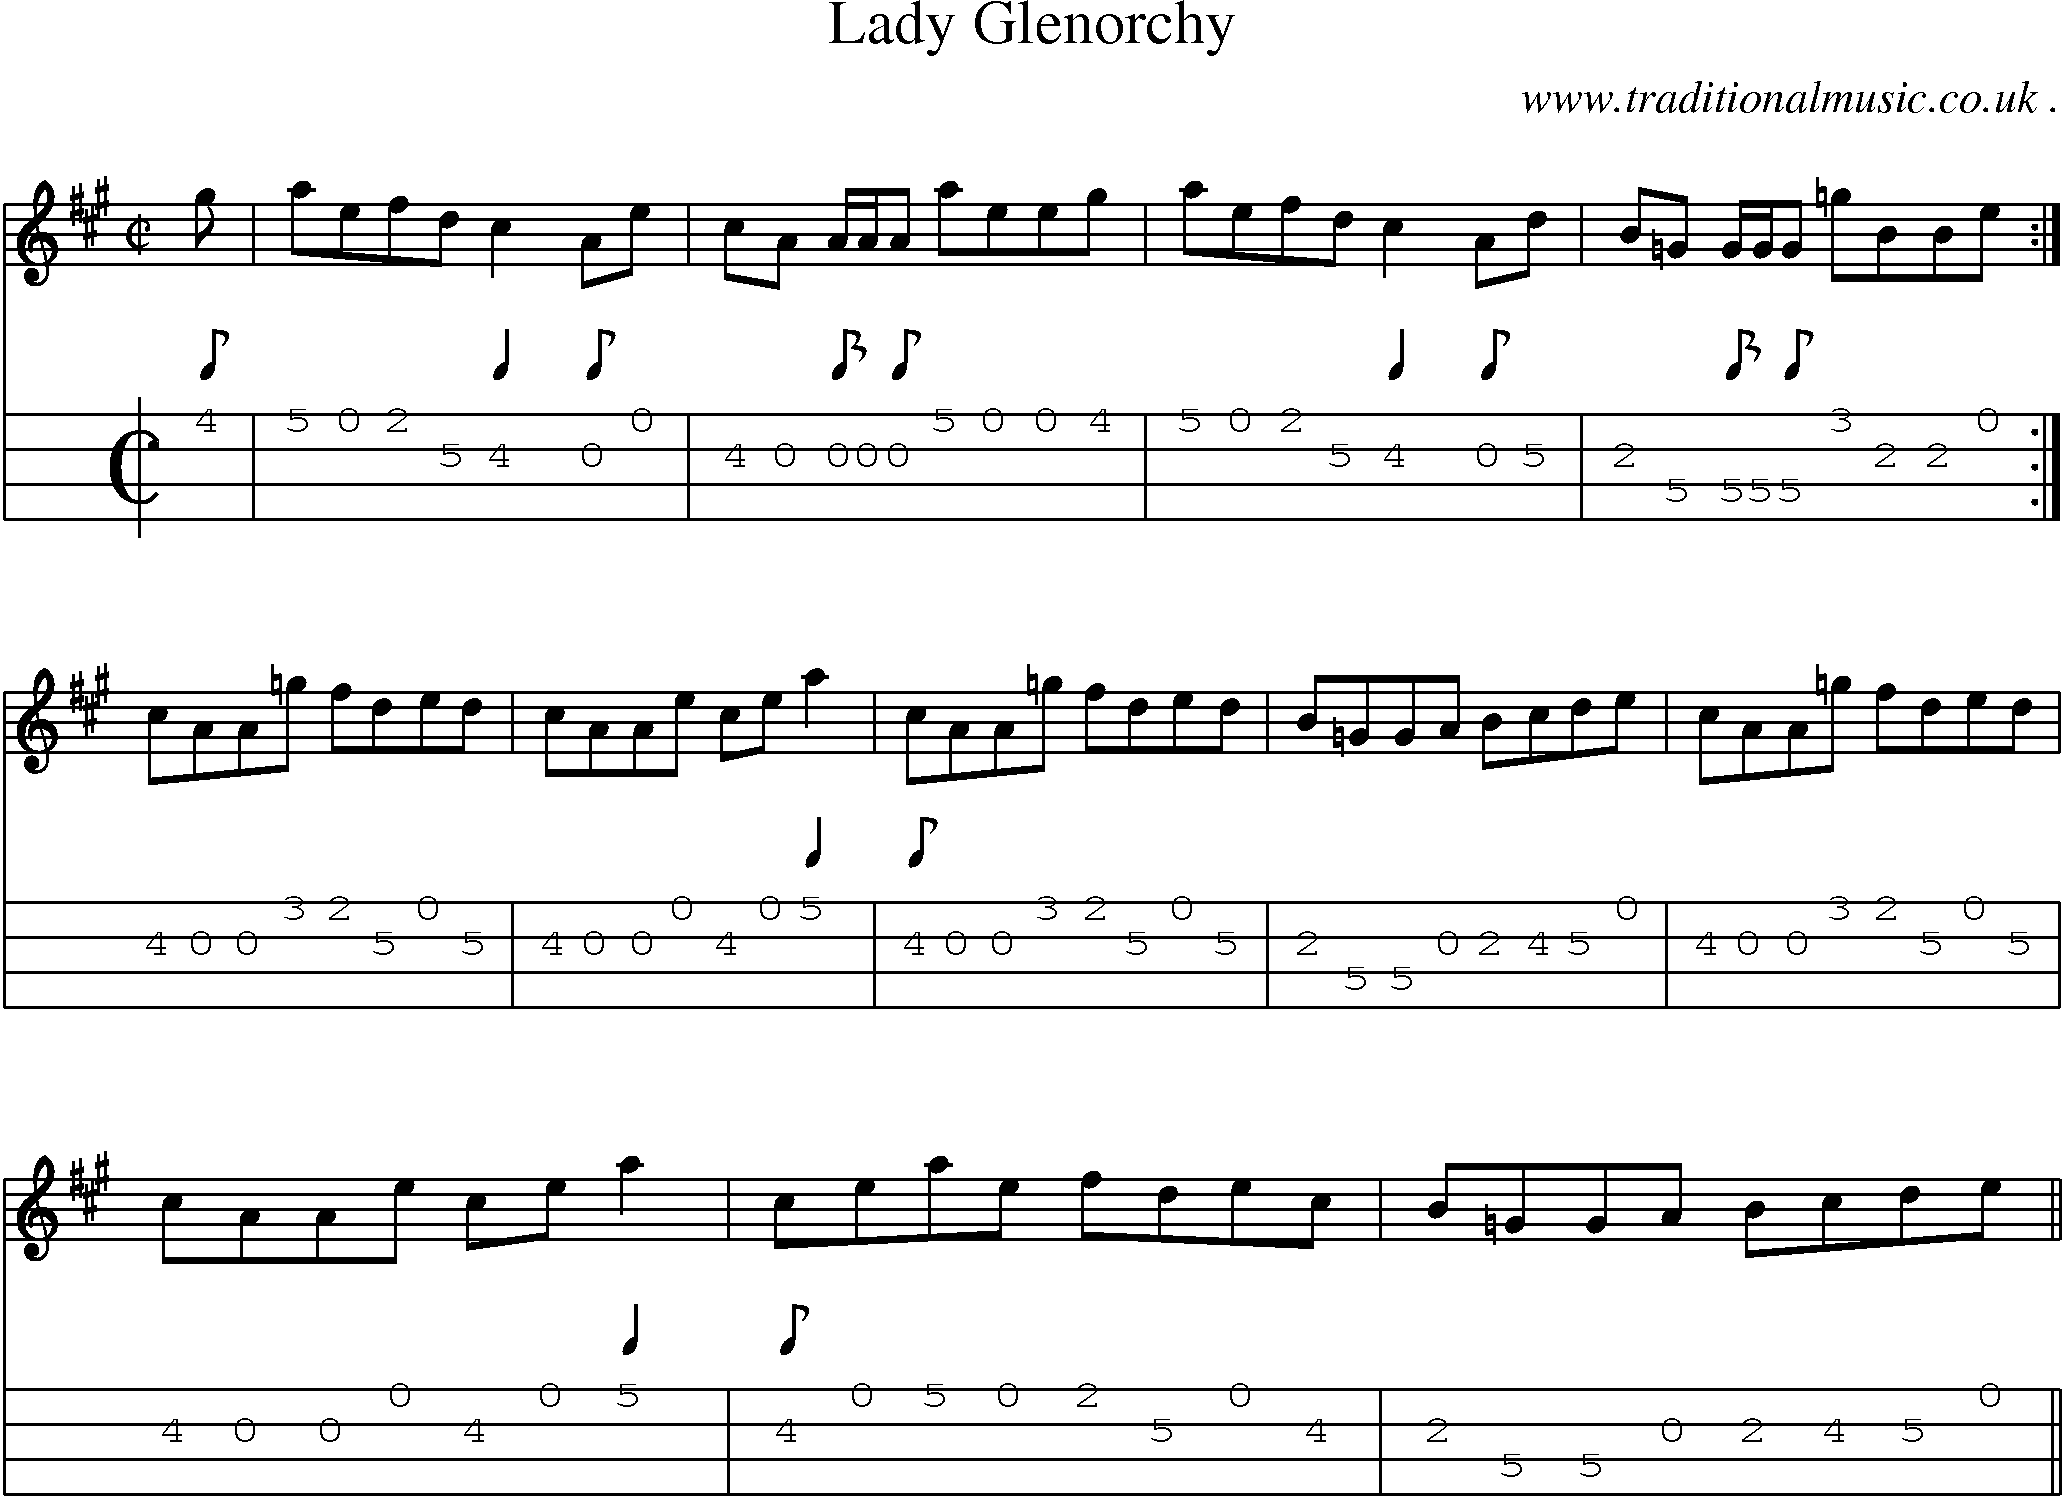 Sheet-music  score, Chords and Mandolin Tabs for Lady Glenorchy